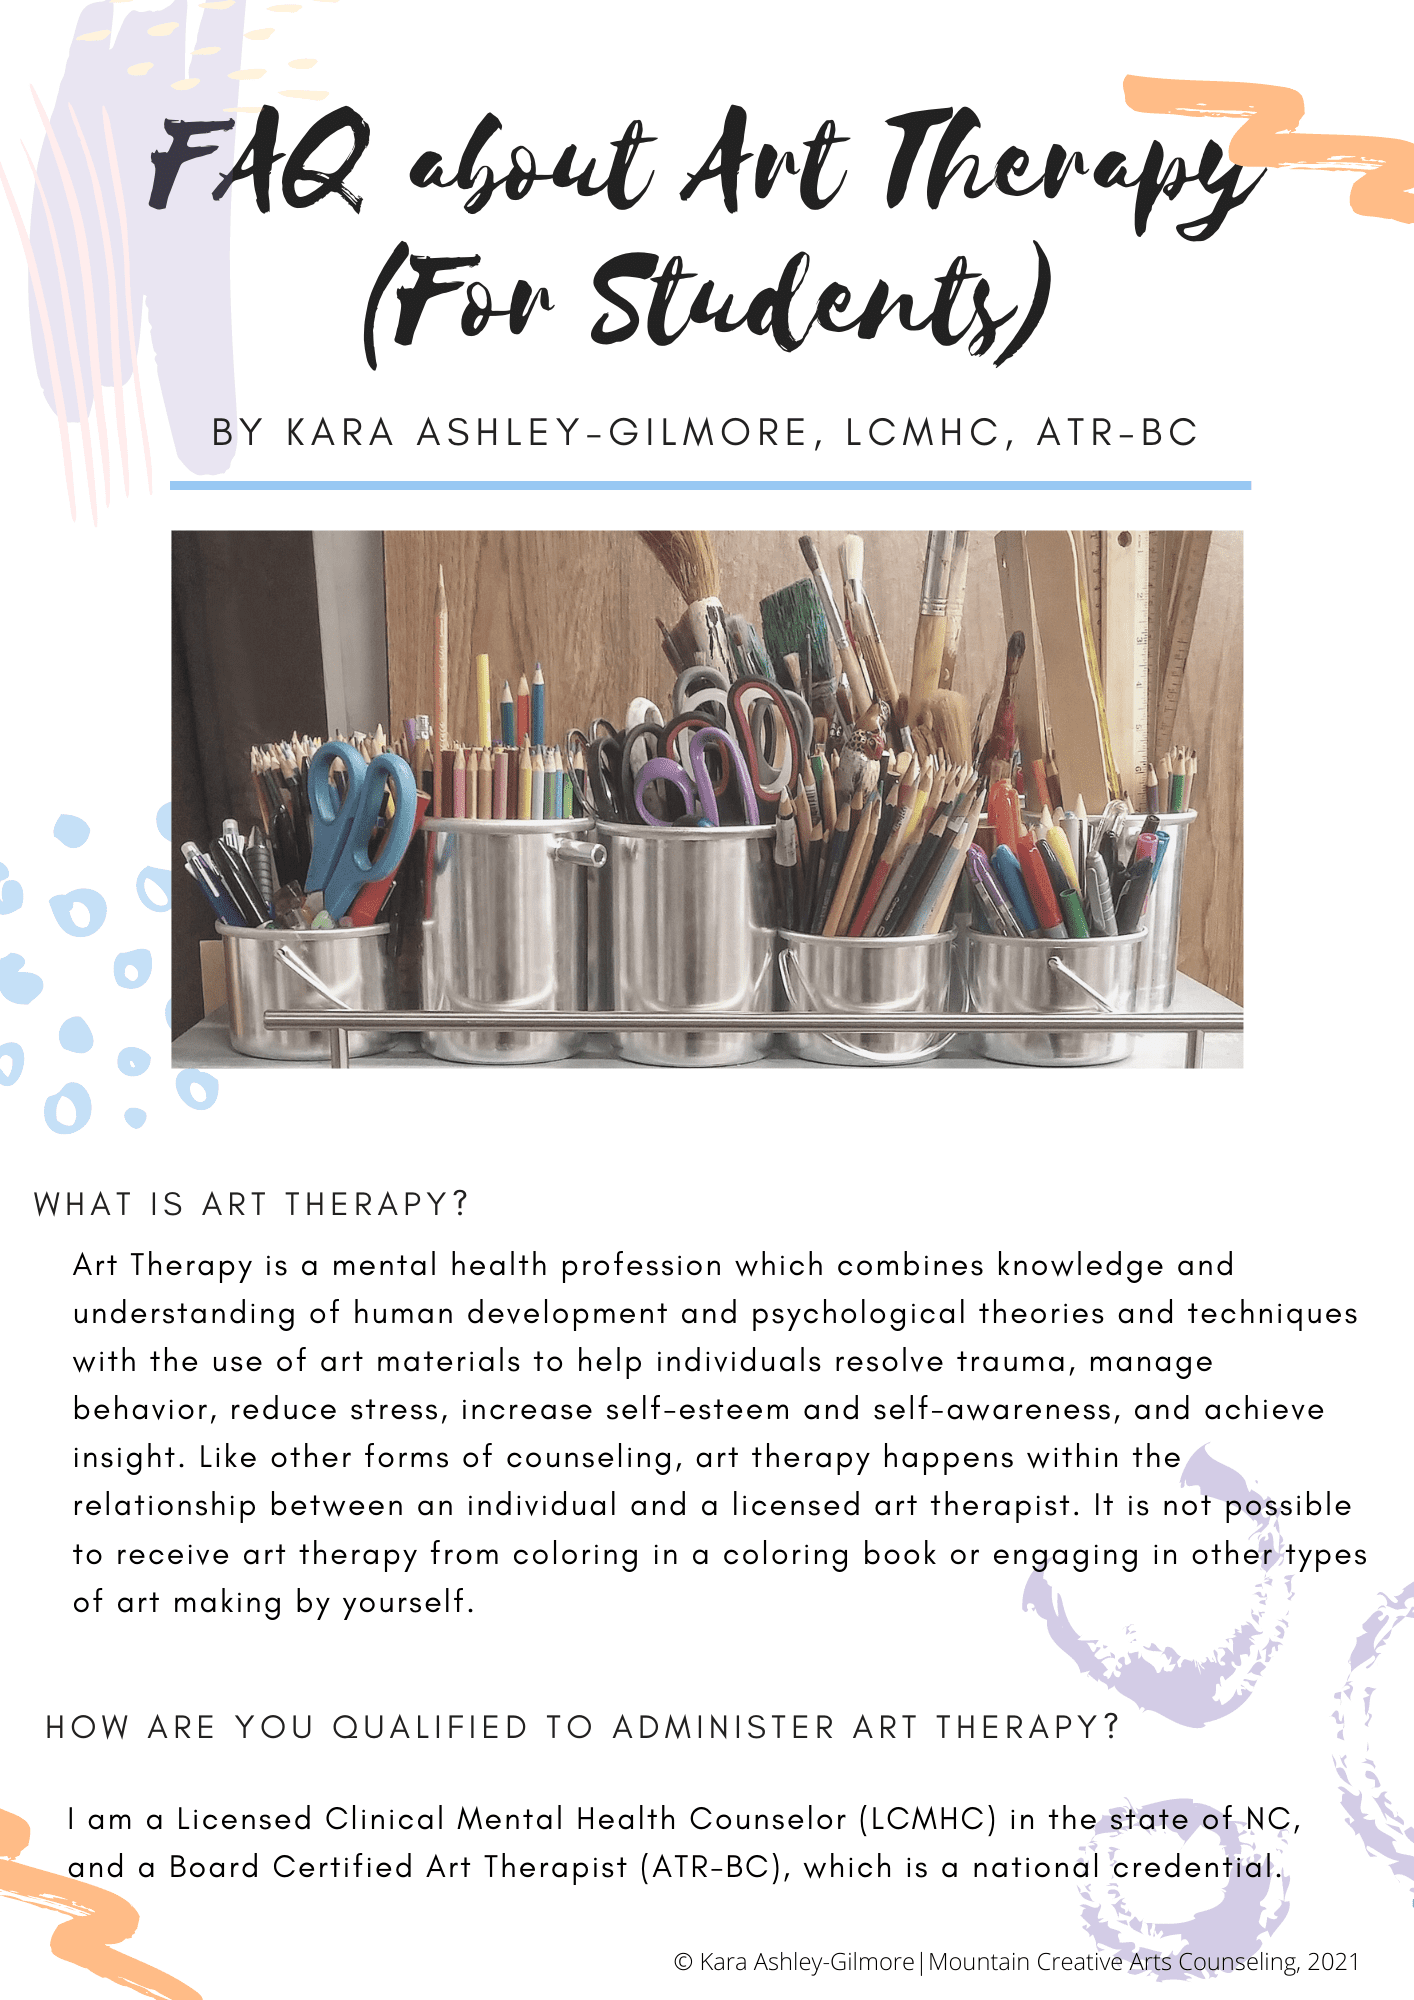 FAQ About Art Therapy 1